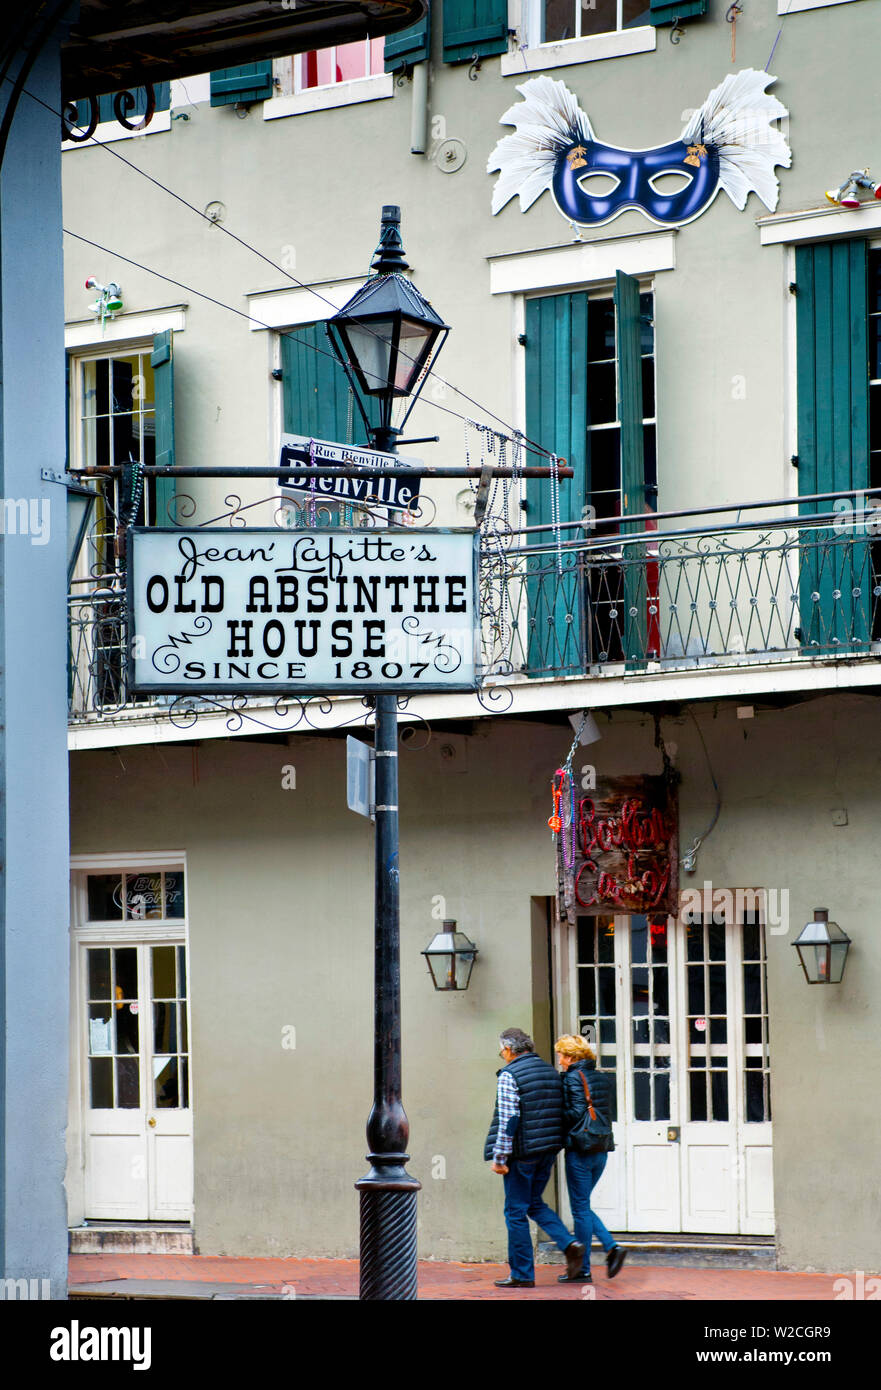 Louisiana, New Orleans, French Quarter, Bourbon Street, Jean Lafitte's Old Absinthe House, Building Over 200 Years Old Stock Photo